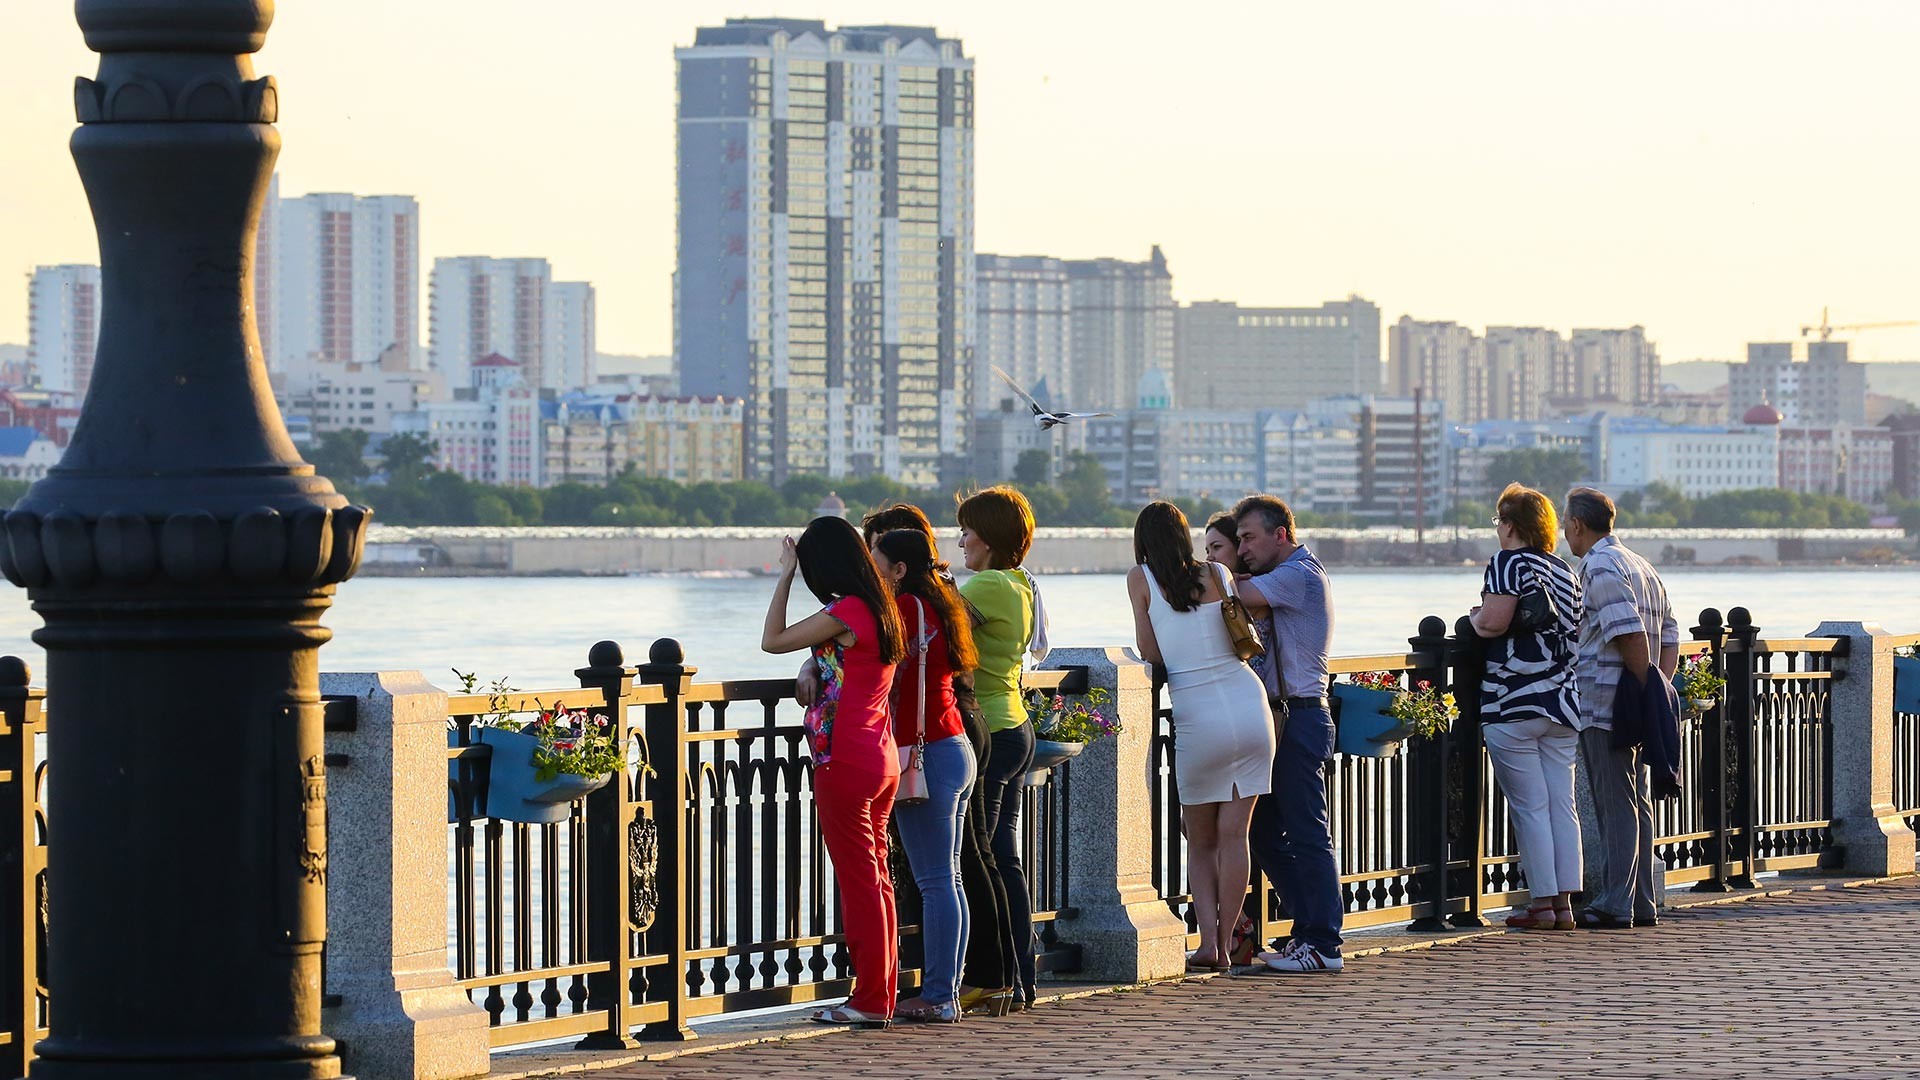 Blagoveshchensk. View of the Amur River embankment and the city of Heihe.